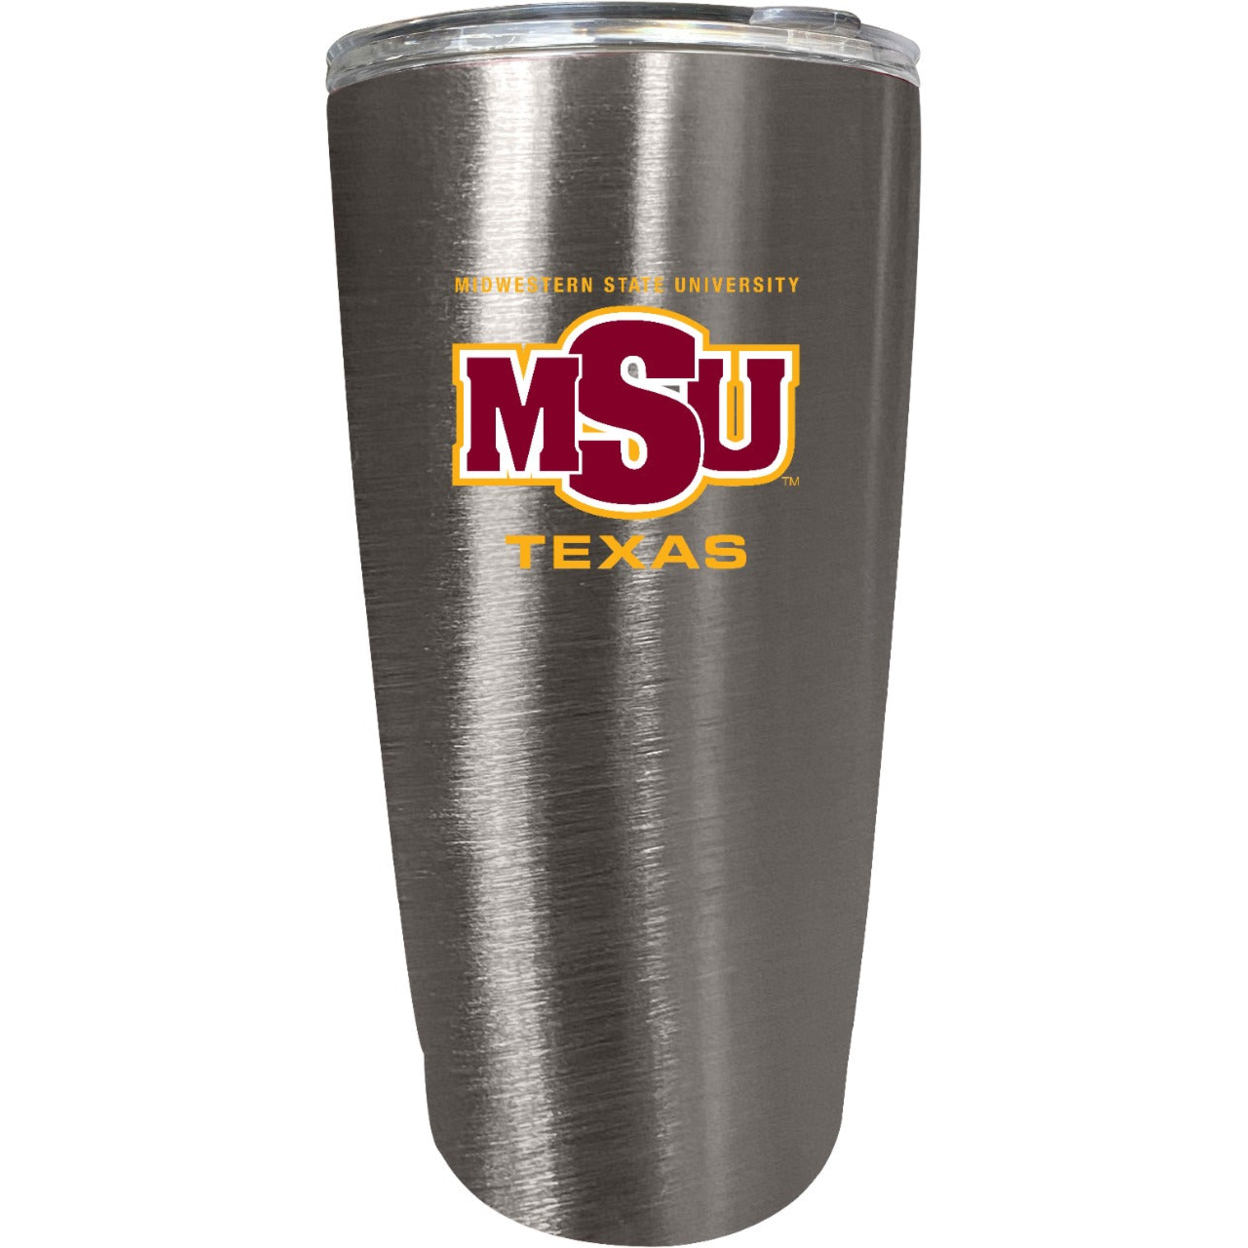 Midwestern State University Mustangs 16 Oz Insulated Stainless Steel Tumbler Colorless